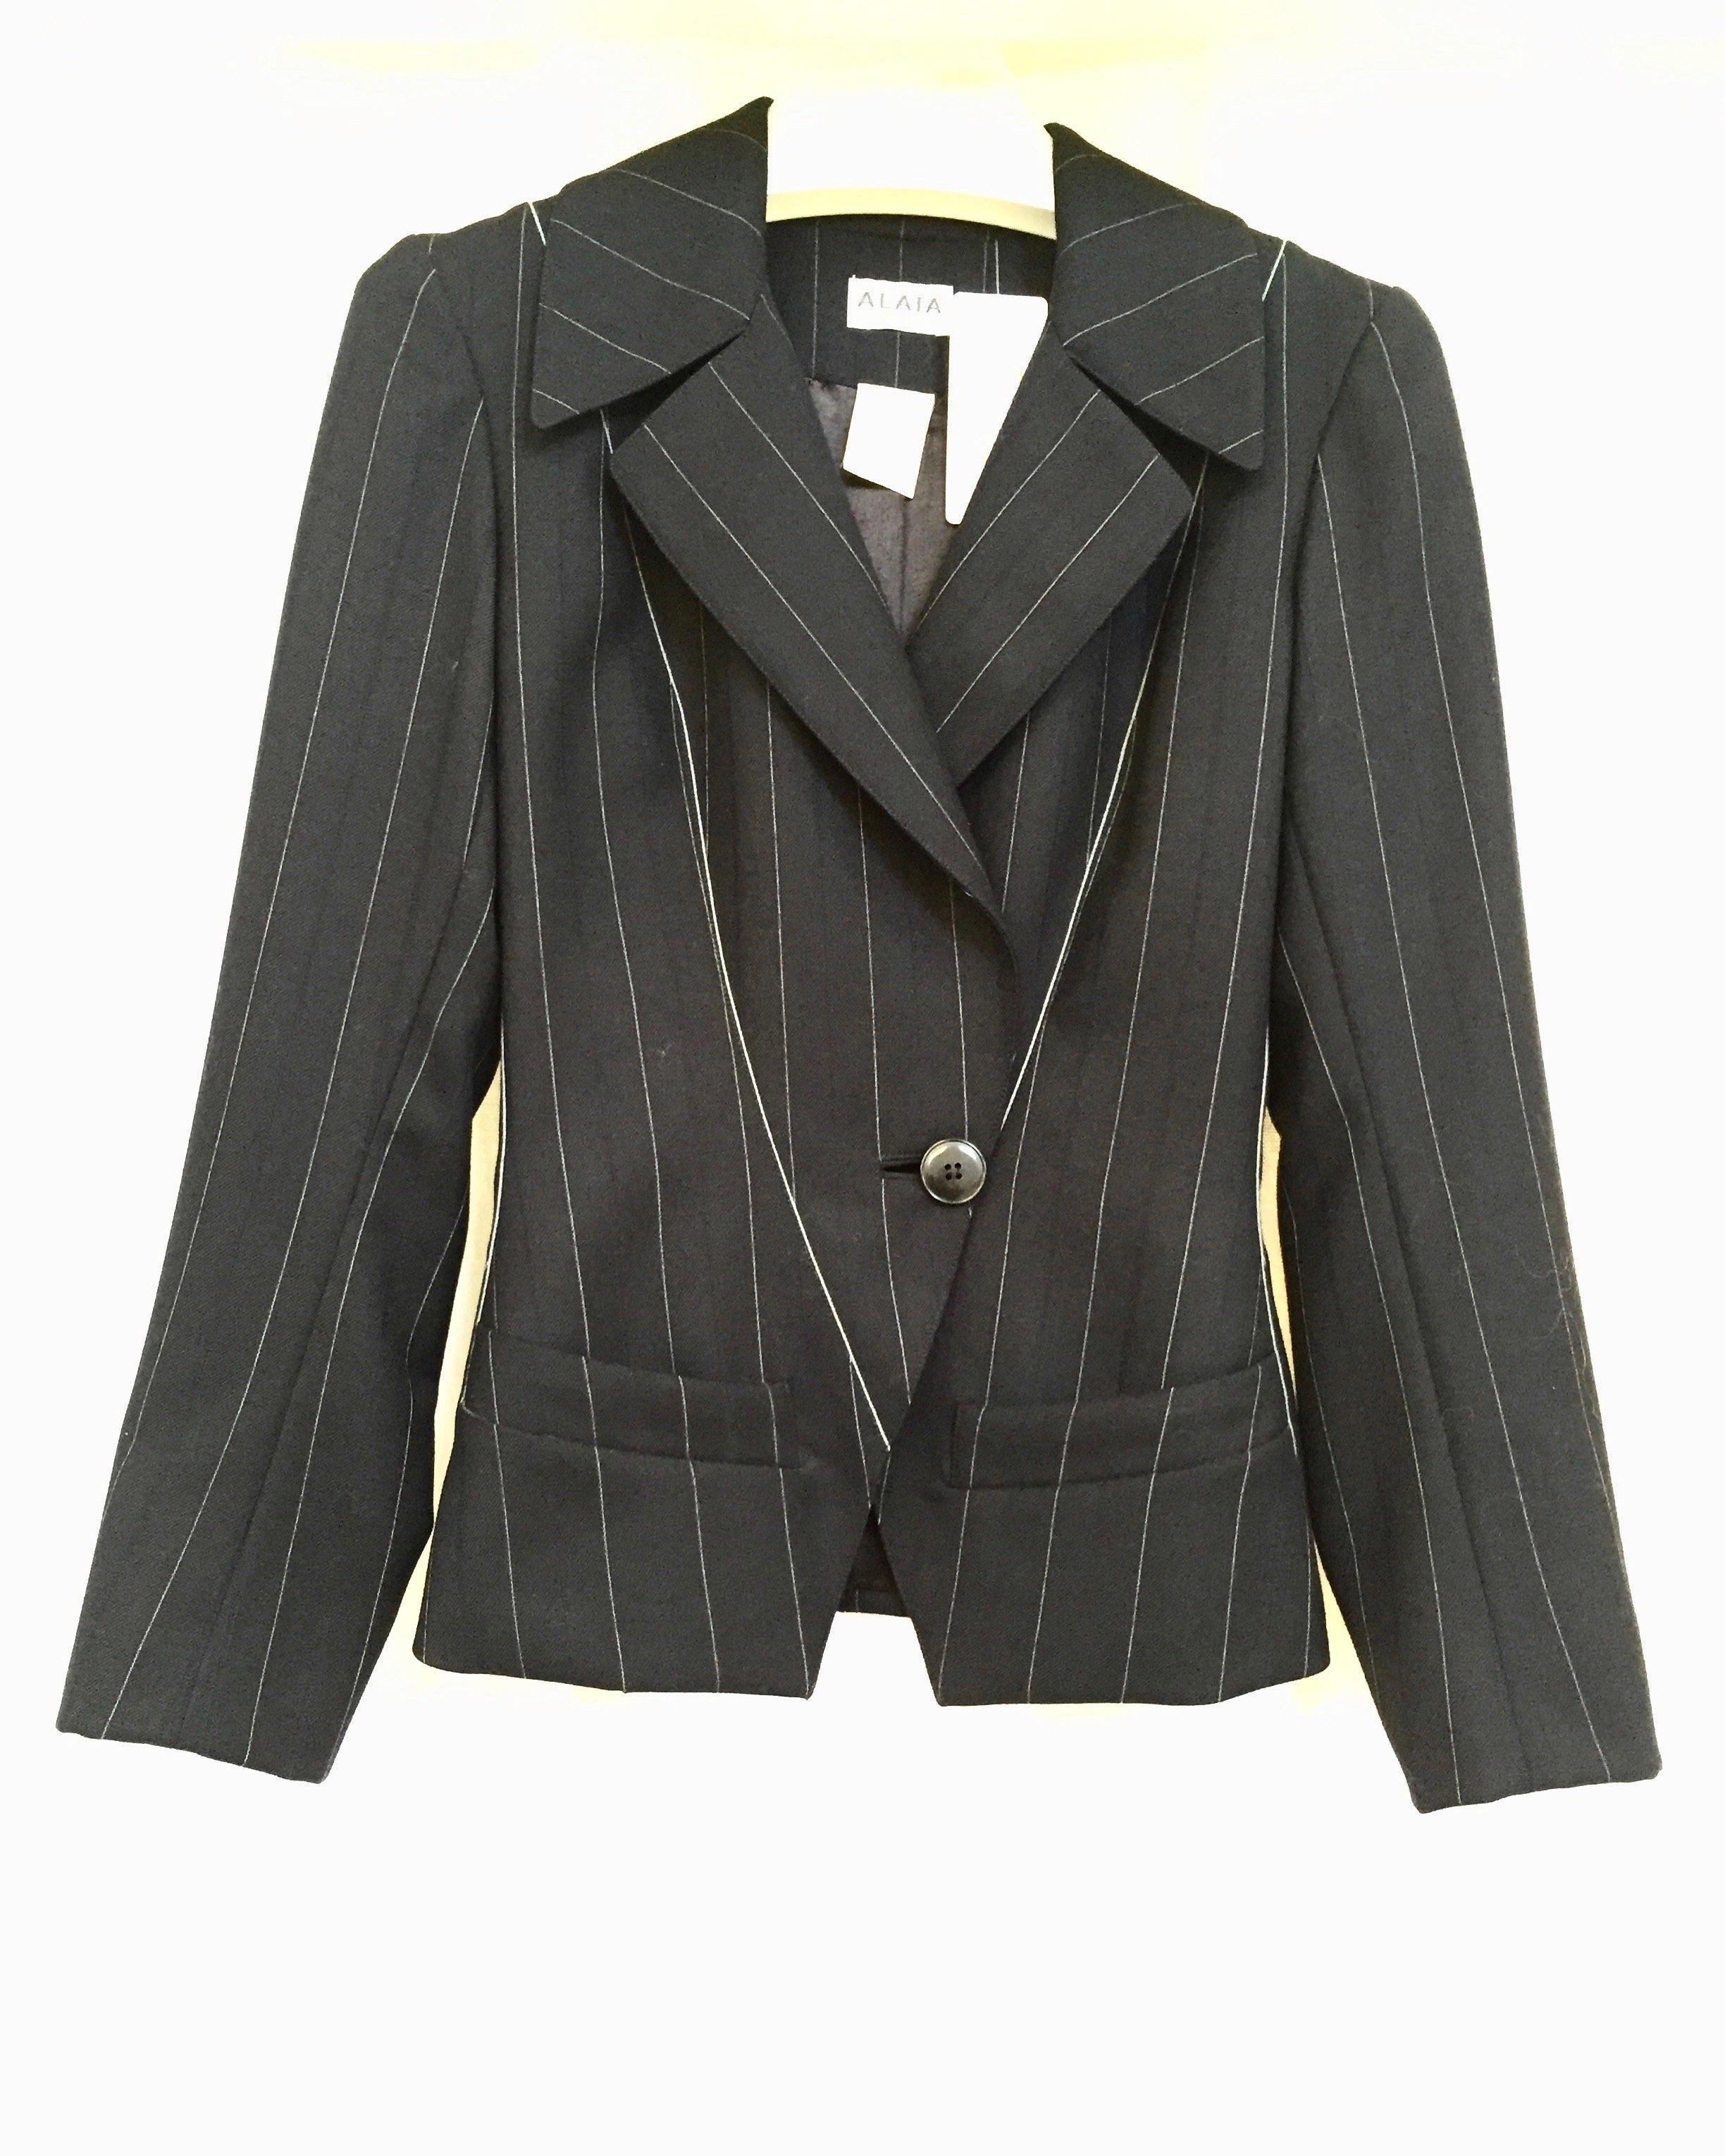 Vintage 1990s ALAIA Black and Grey Pin striped Fitted Jacket. Blazer lined in silk.
Size : 4
BUST: 34 INCH
WAIST: 27 INCH
HIP : 34 INCH
